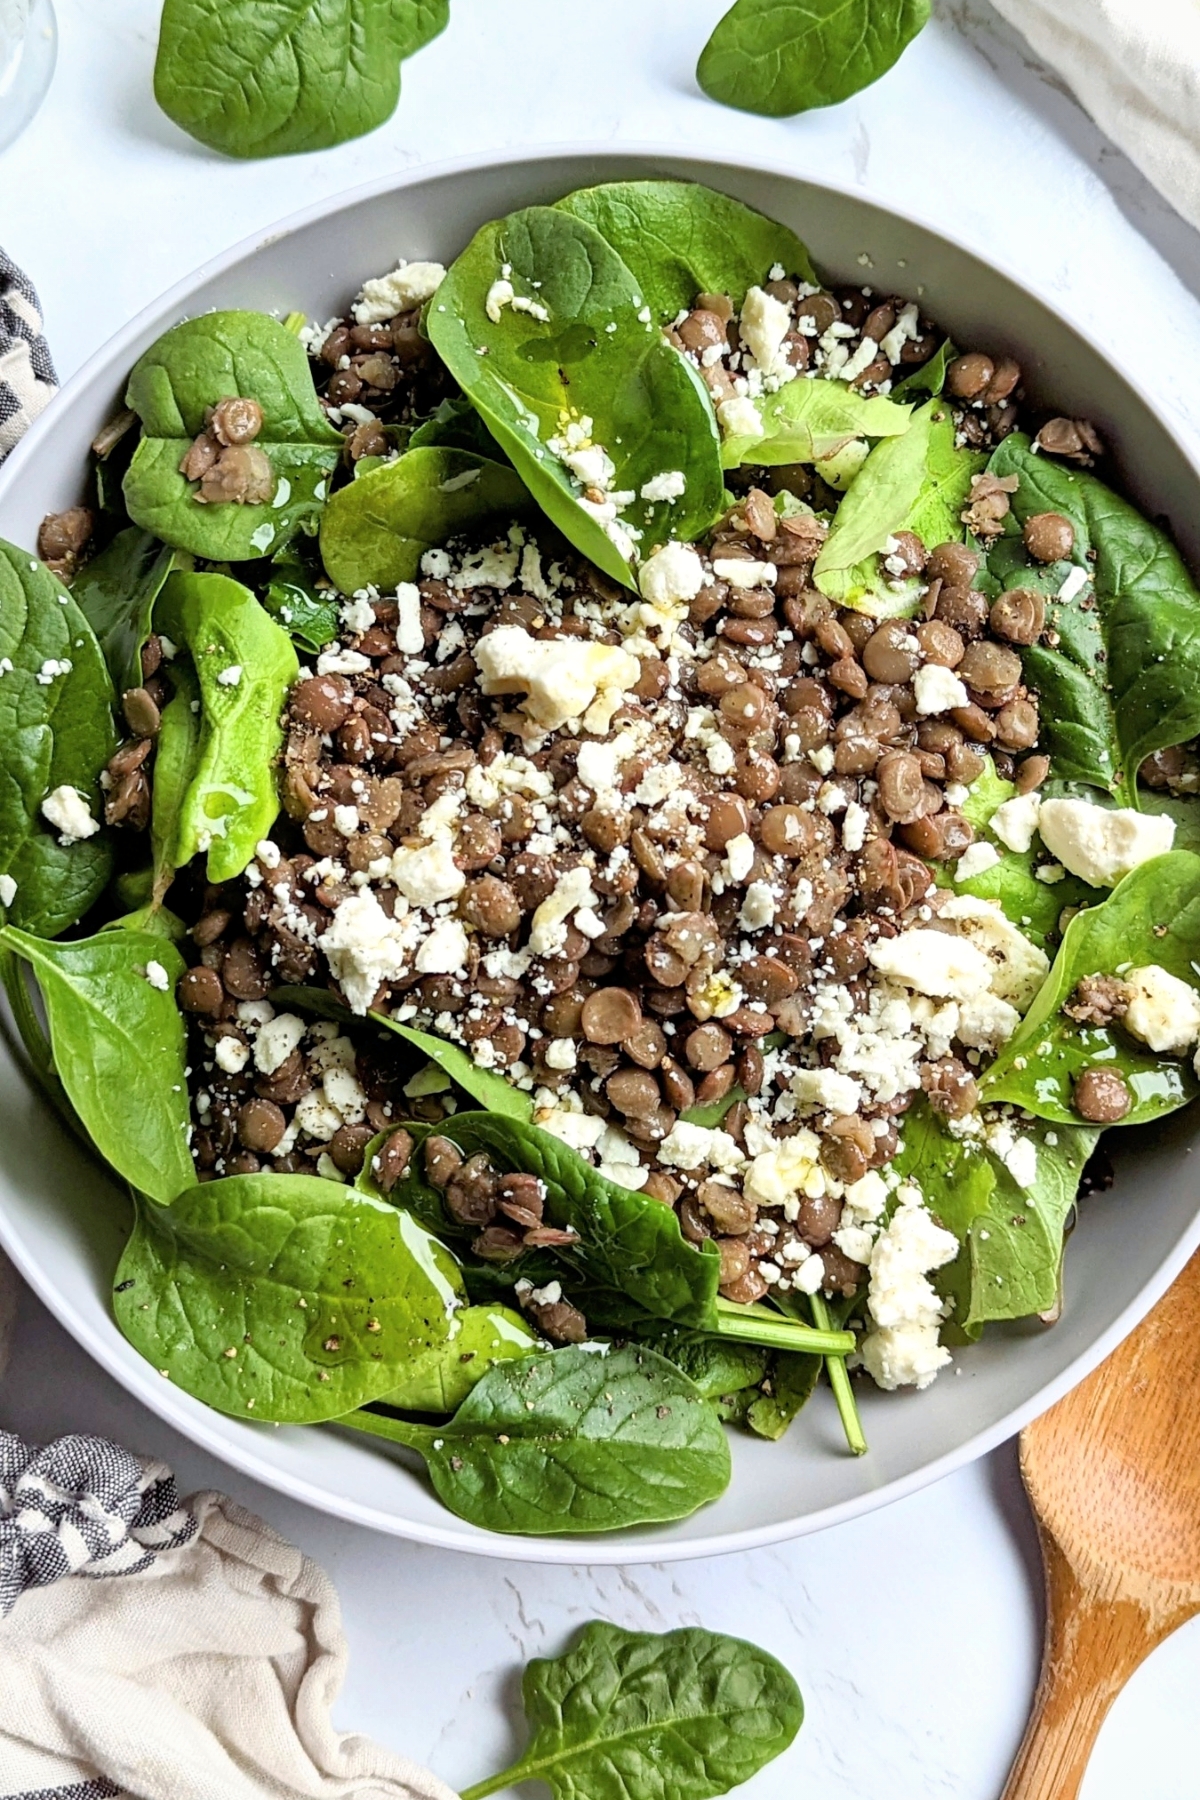 lentil spinach salad recipe with brown lentils feta cheese and an apple cider vinaigrette dressing recipe